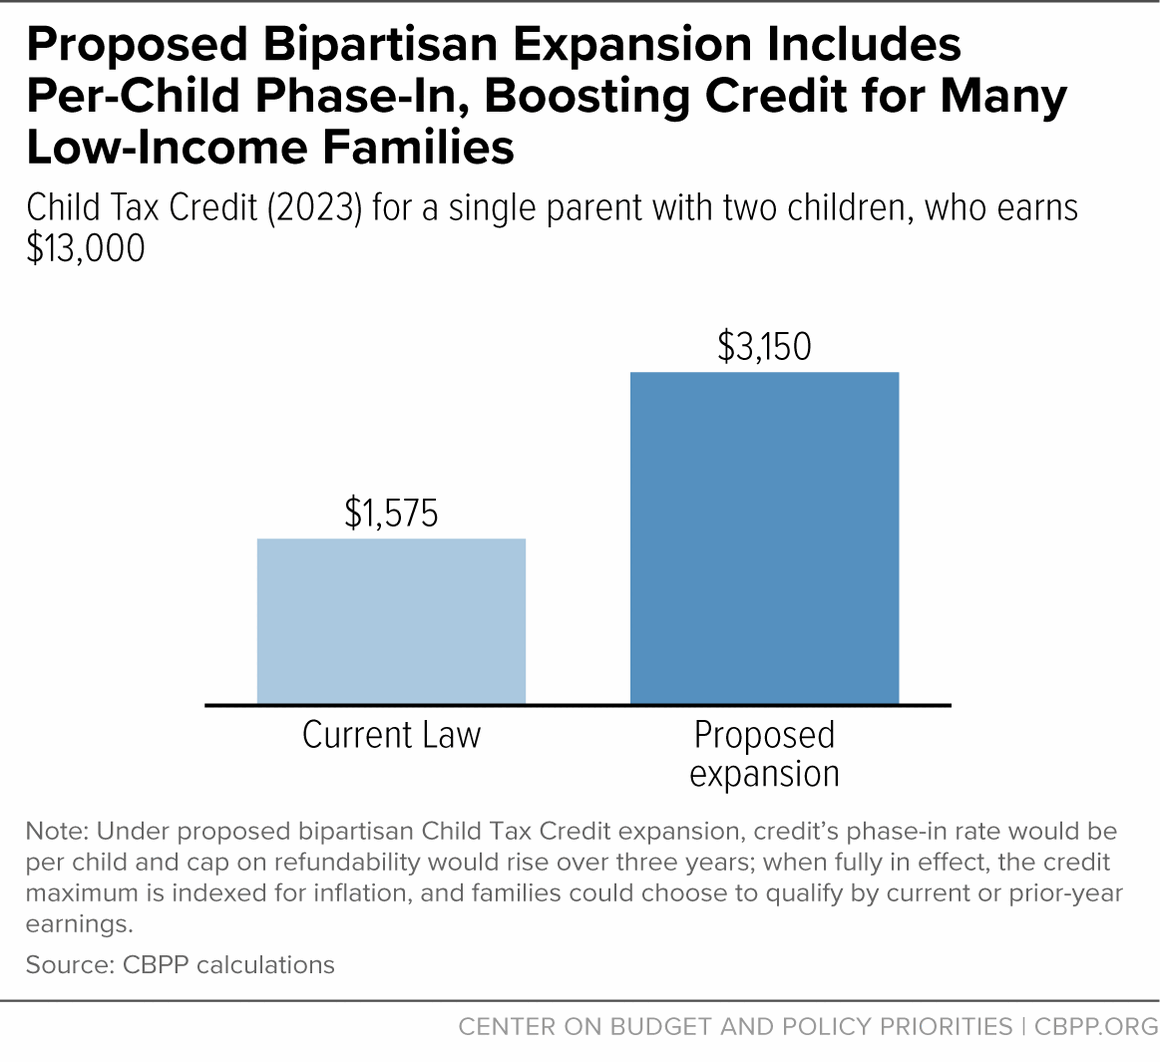 About 16 Million Children in Low-Income Families Would Gain in First Year  of Bipartisan Child Tax Credit Expansion